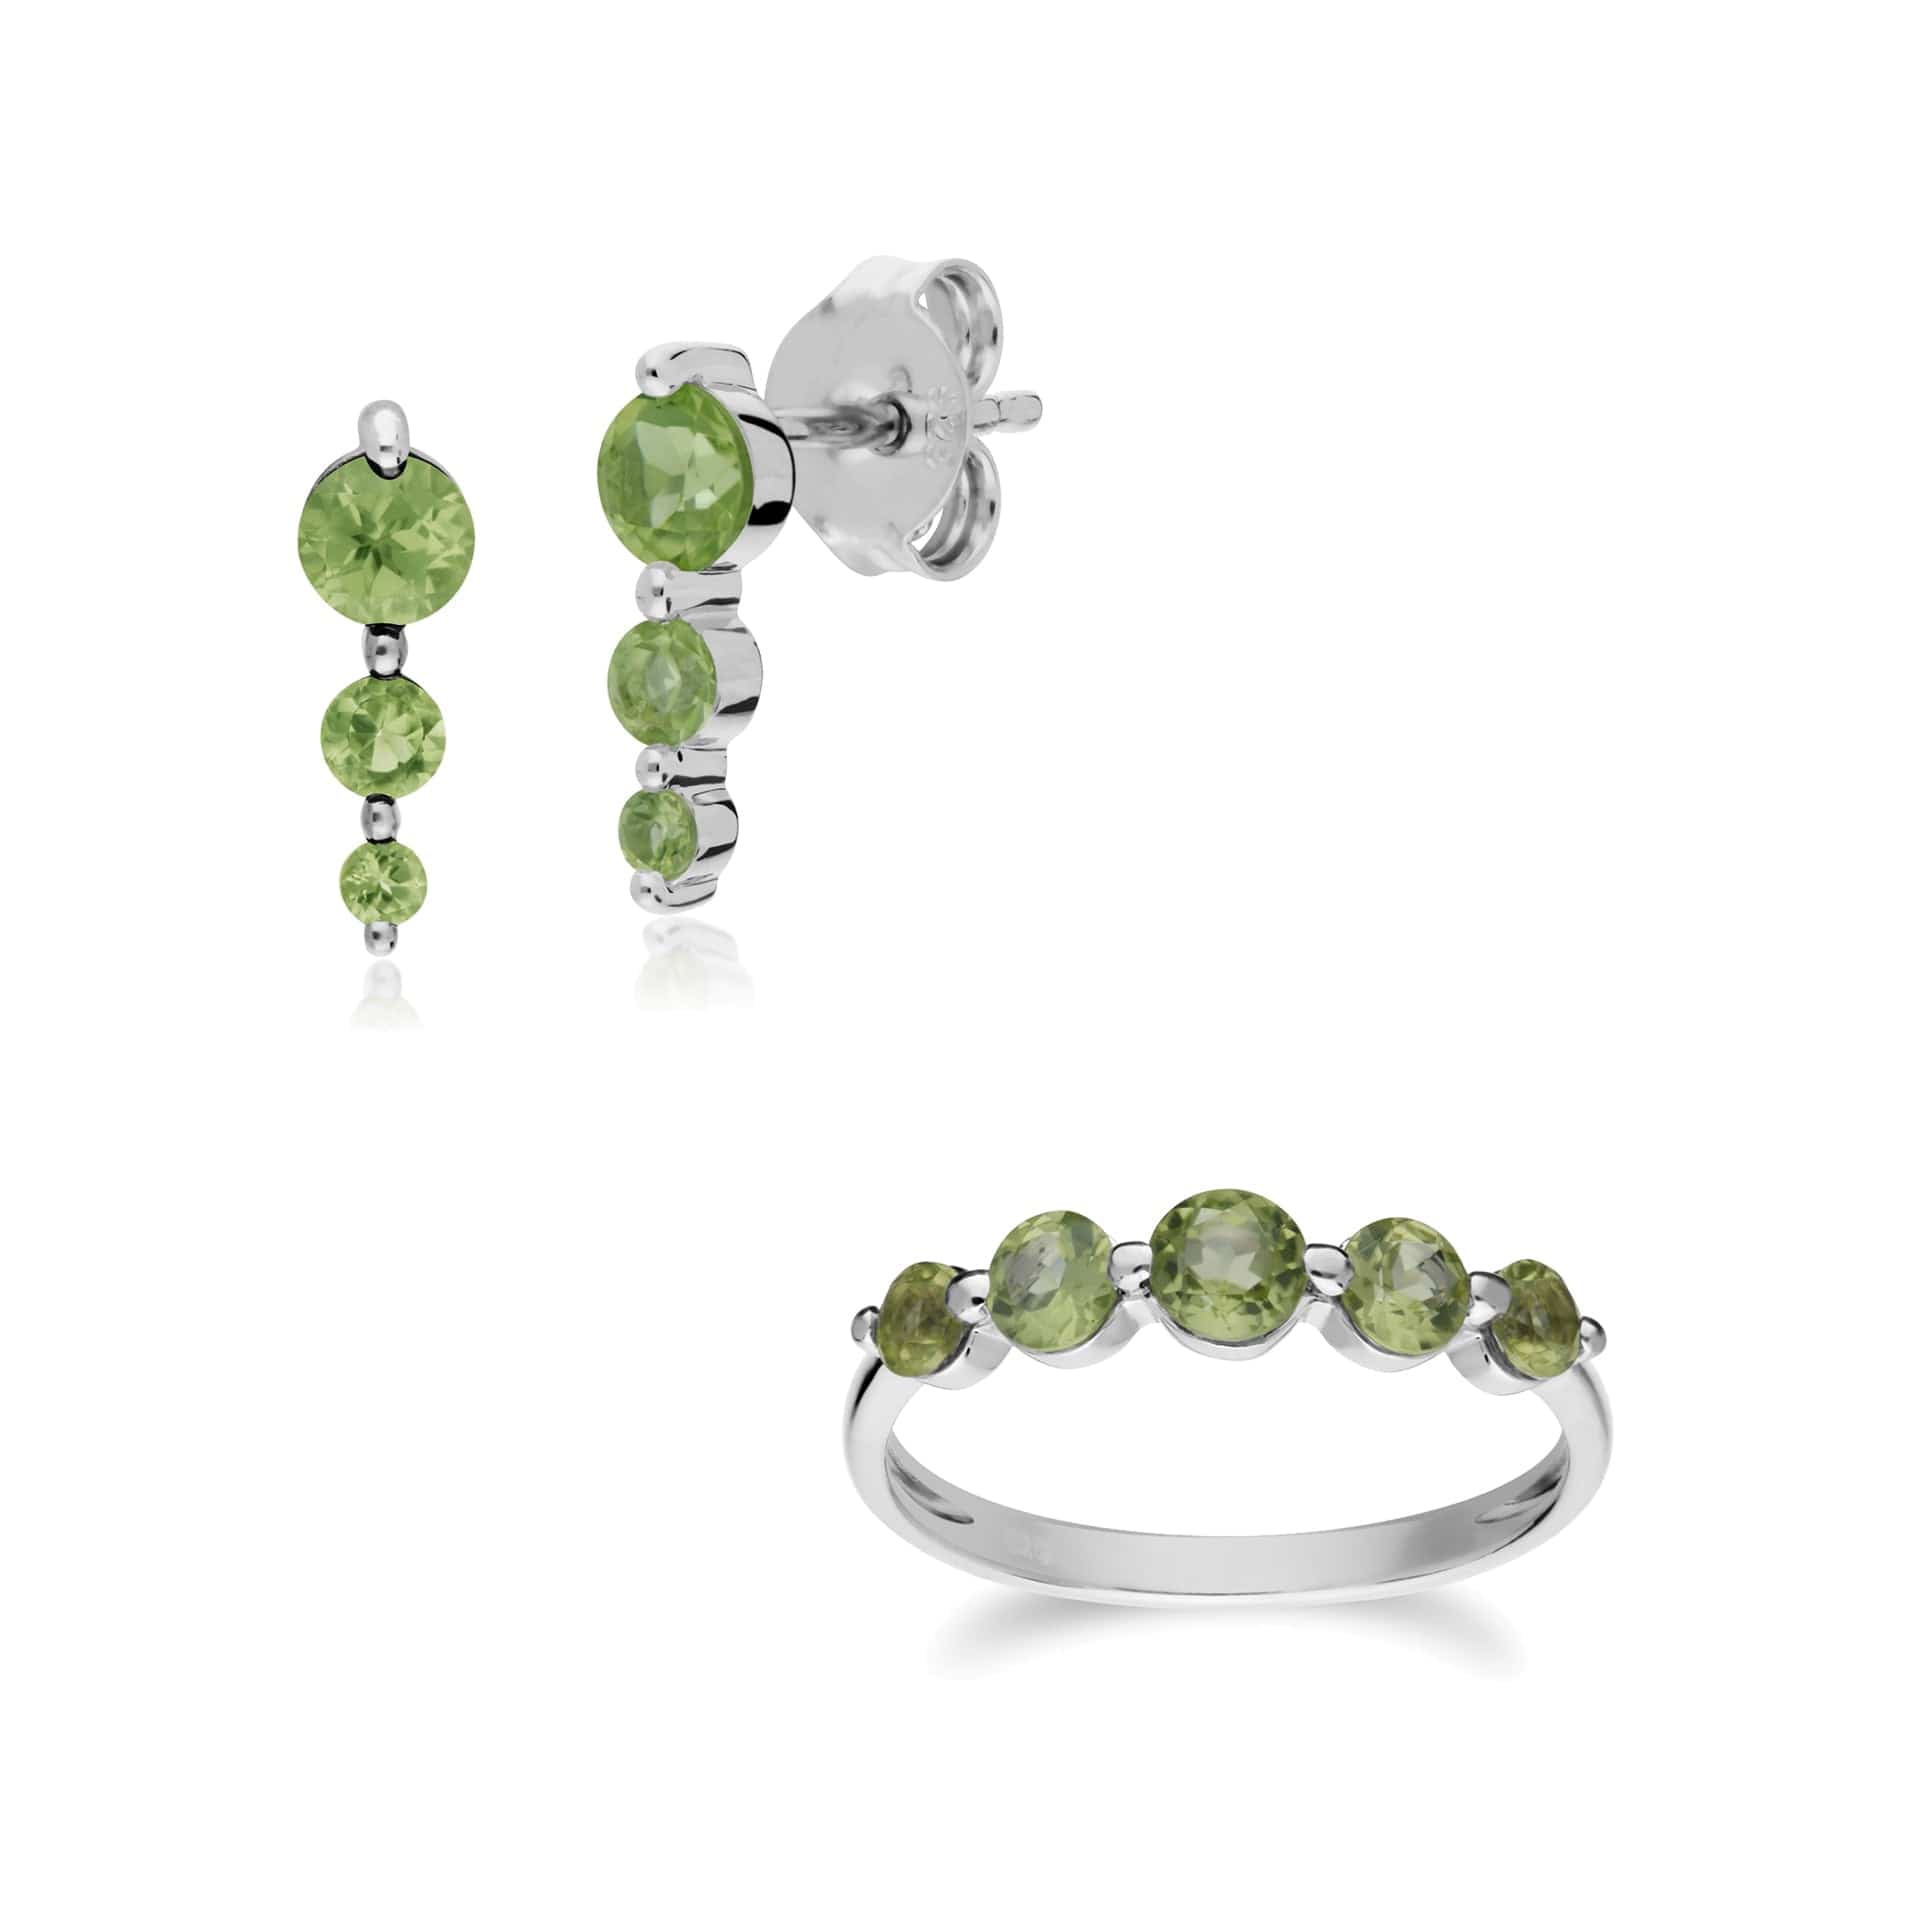 270E025504925-270R055904925 Classic Round Peridot Three Stone Gradient Earrings & Five Stone Ring Set in 925 Sterling Silver 1